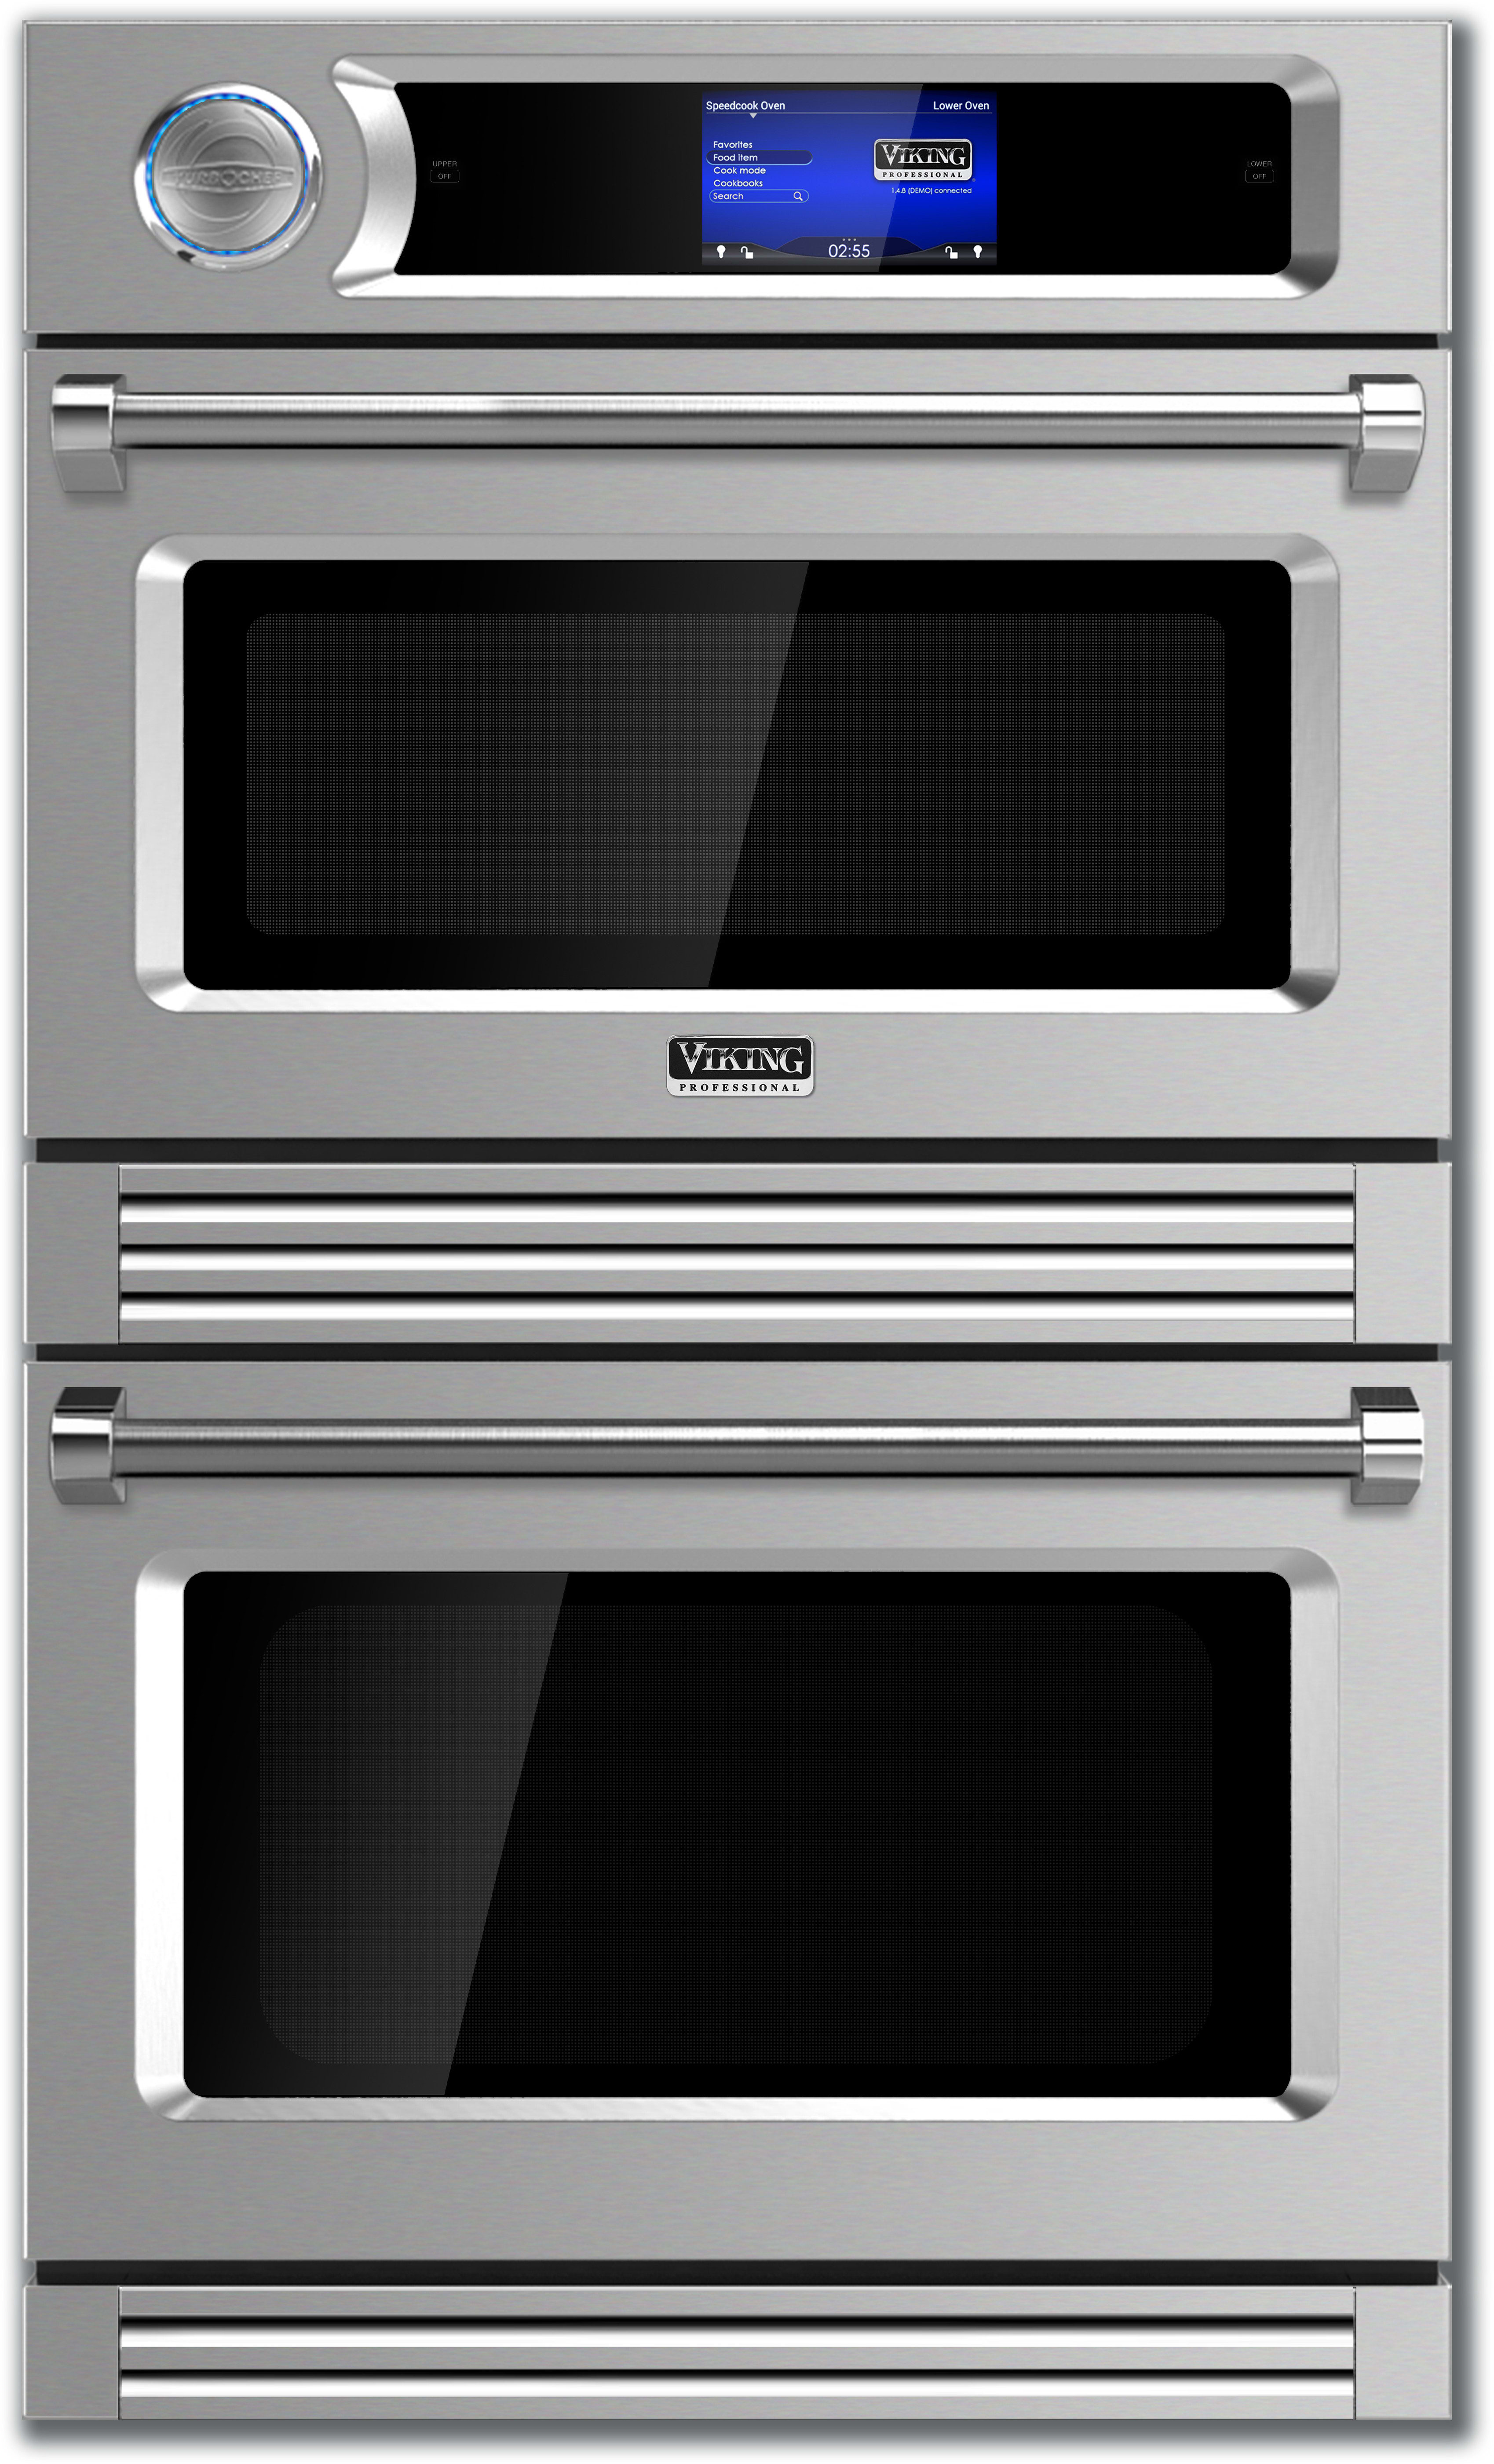 viking double wall oven manual